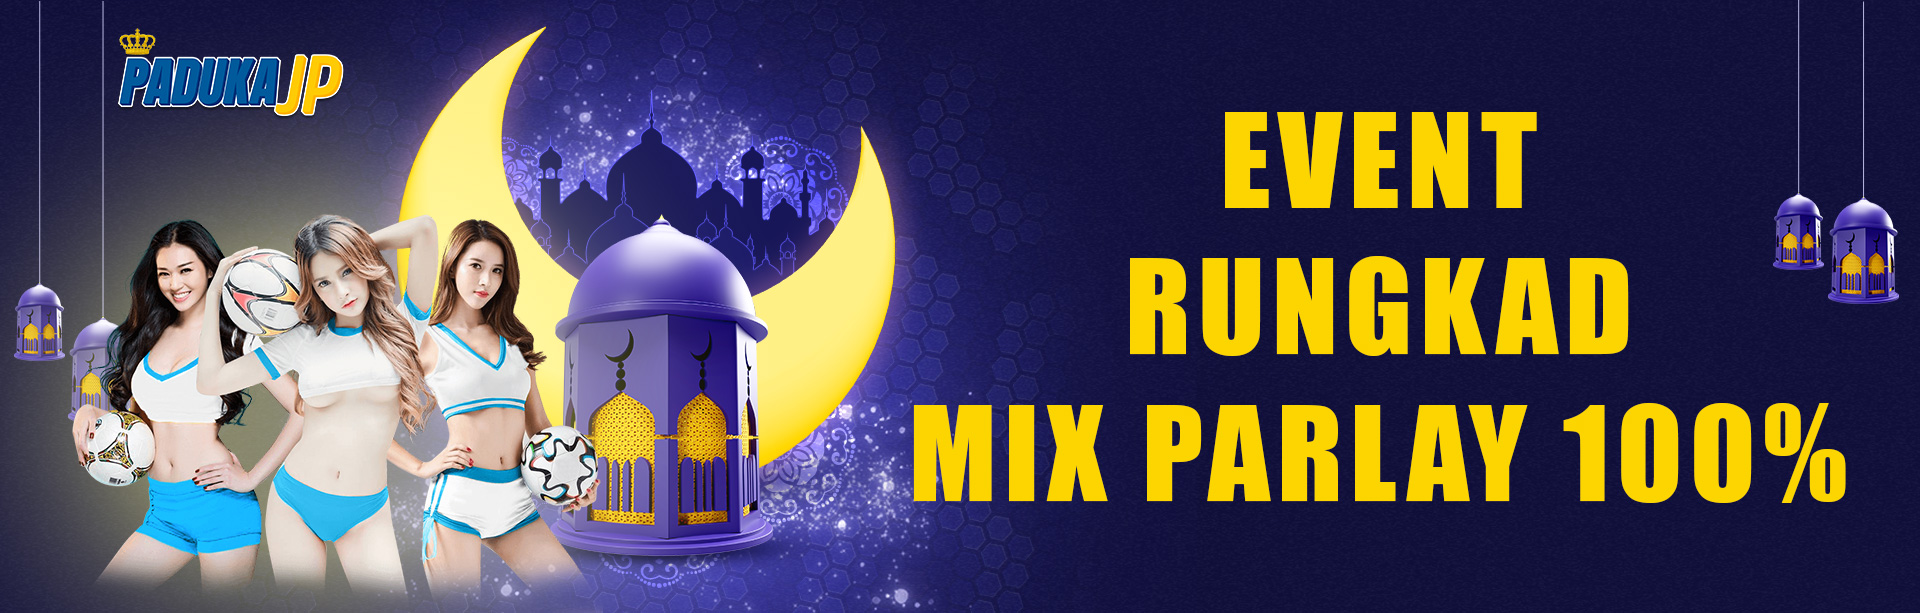 EVENT RUNGKAD MIXPARLAY